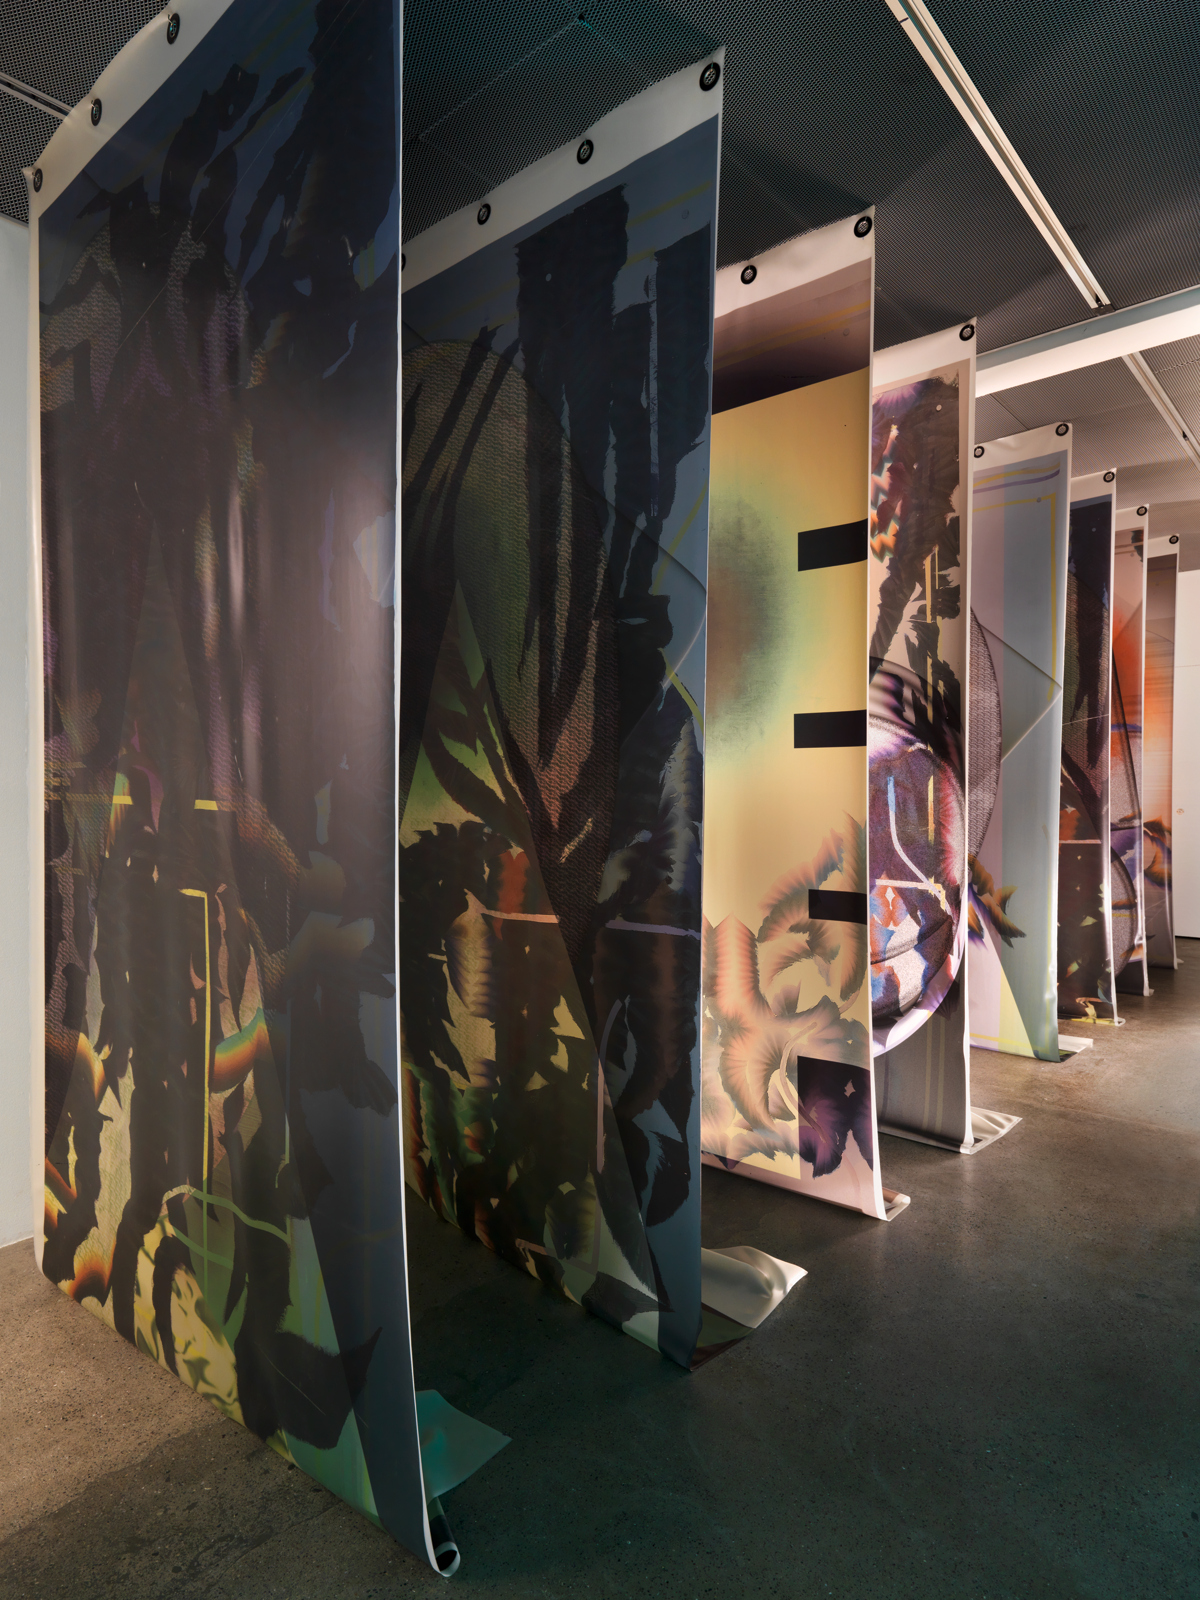 Kerstin Braetsch / Adele Roeder / "Vorahnung (United Brothers and Sisters)", exhibition view, Kunsthalle Zürich / 2012